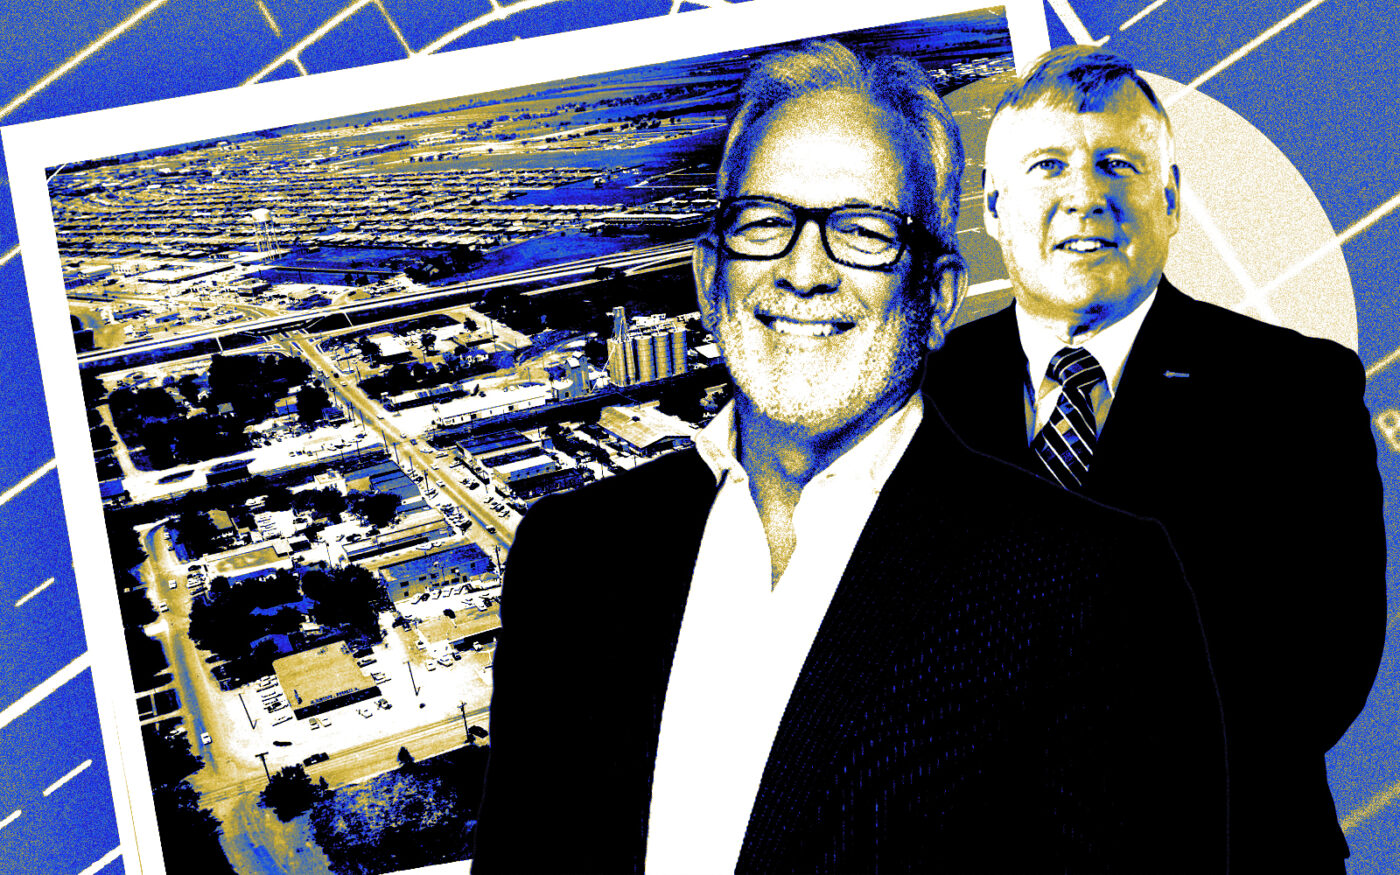 From left: Wolverine Interests CEO Jim Leslie, UTD president Richard Benson along with an aerial view of Richardson (Getty, Wolverine Interests, UTD)